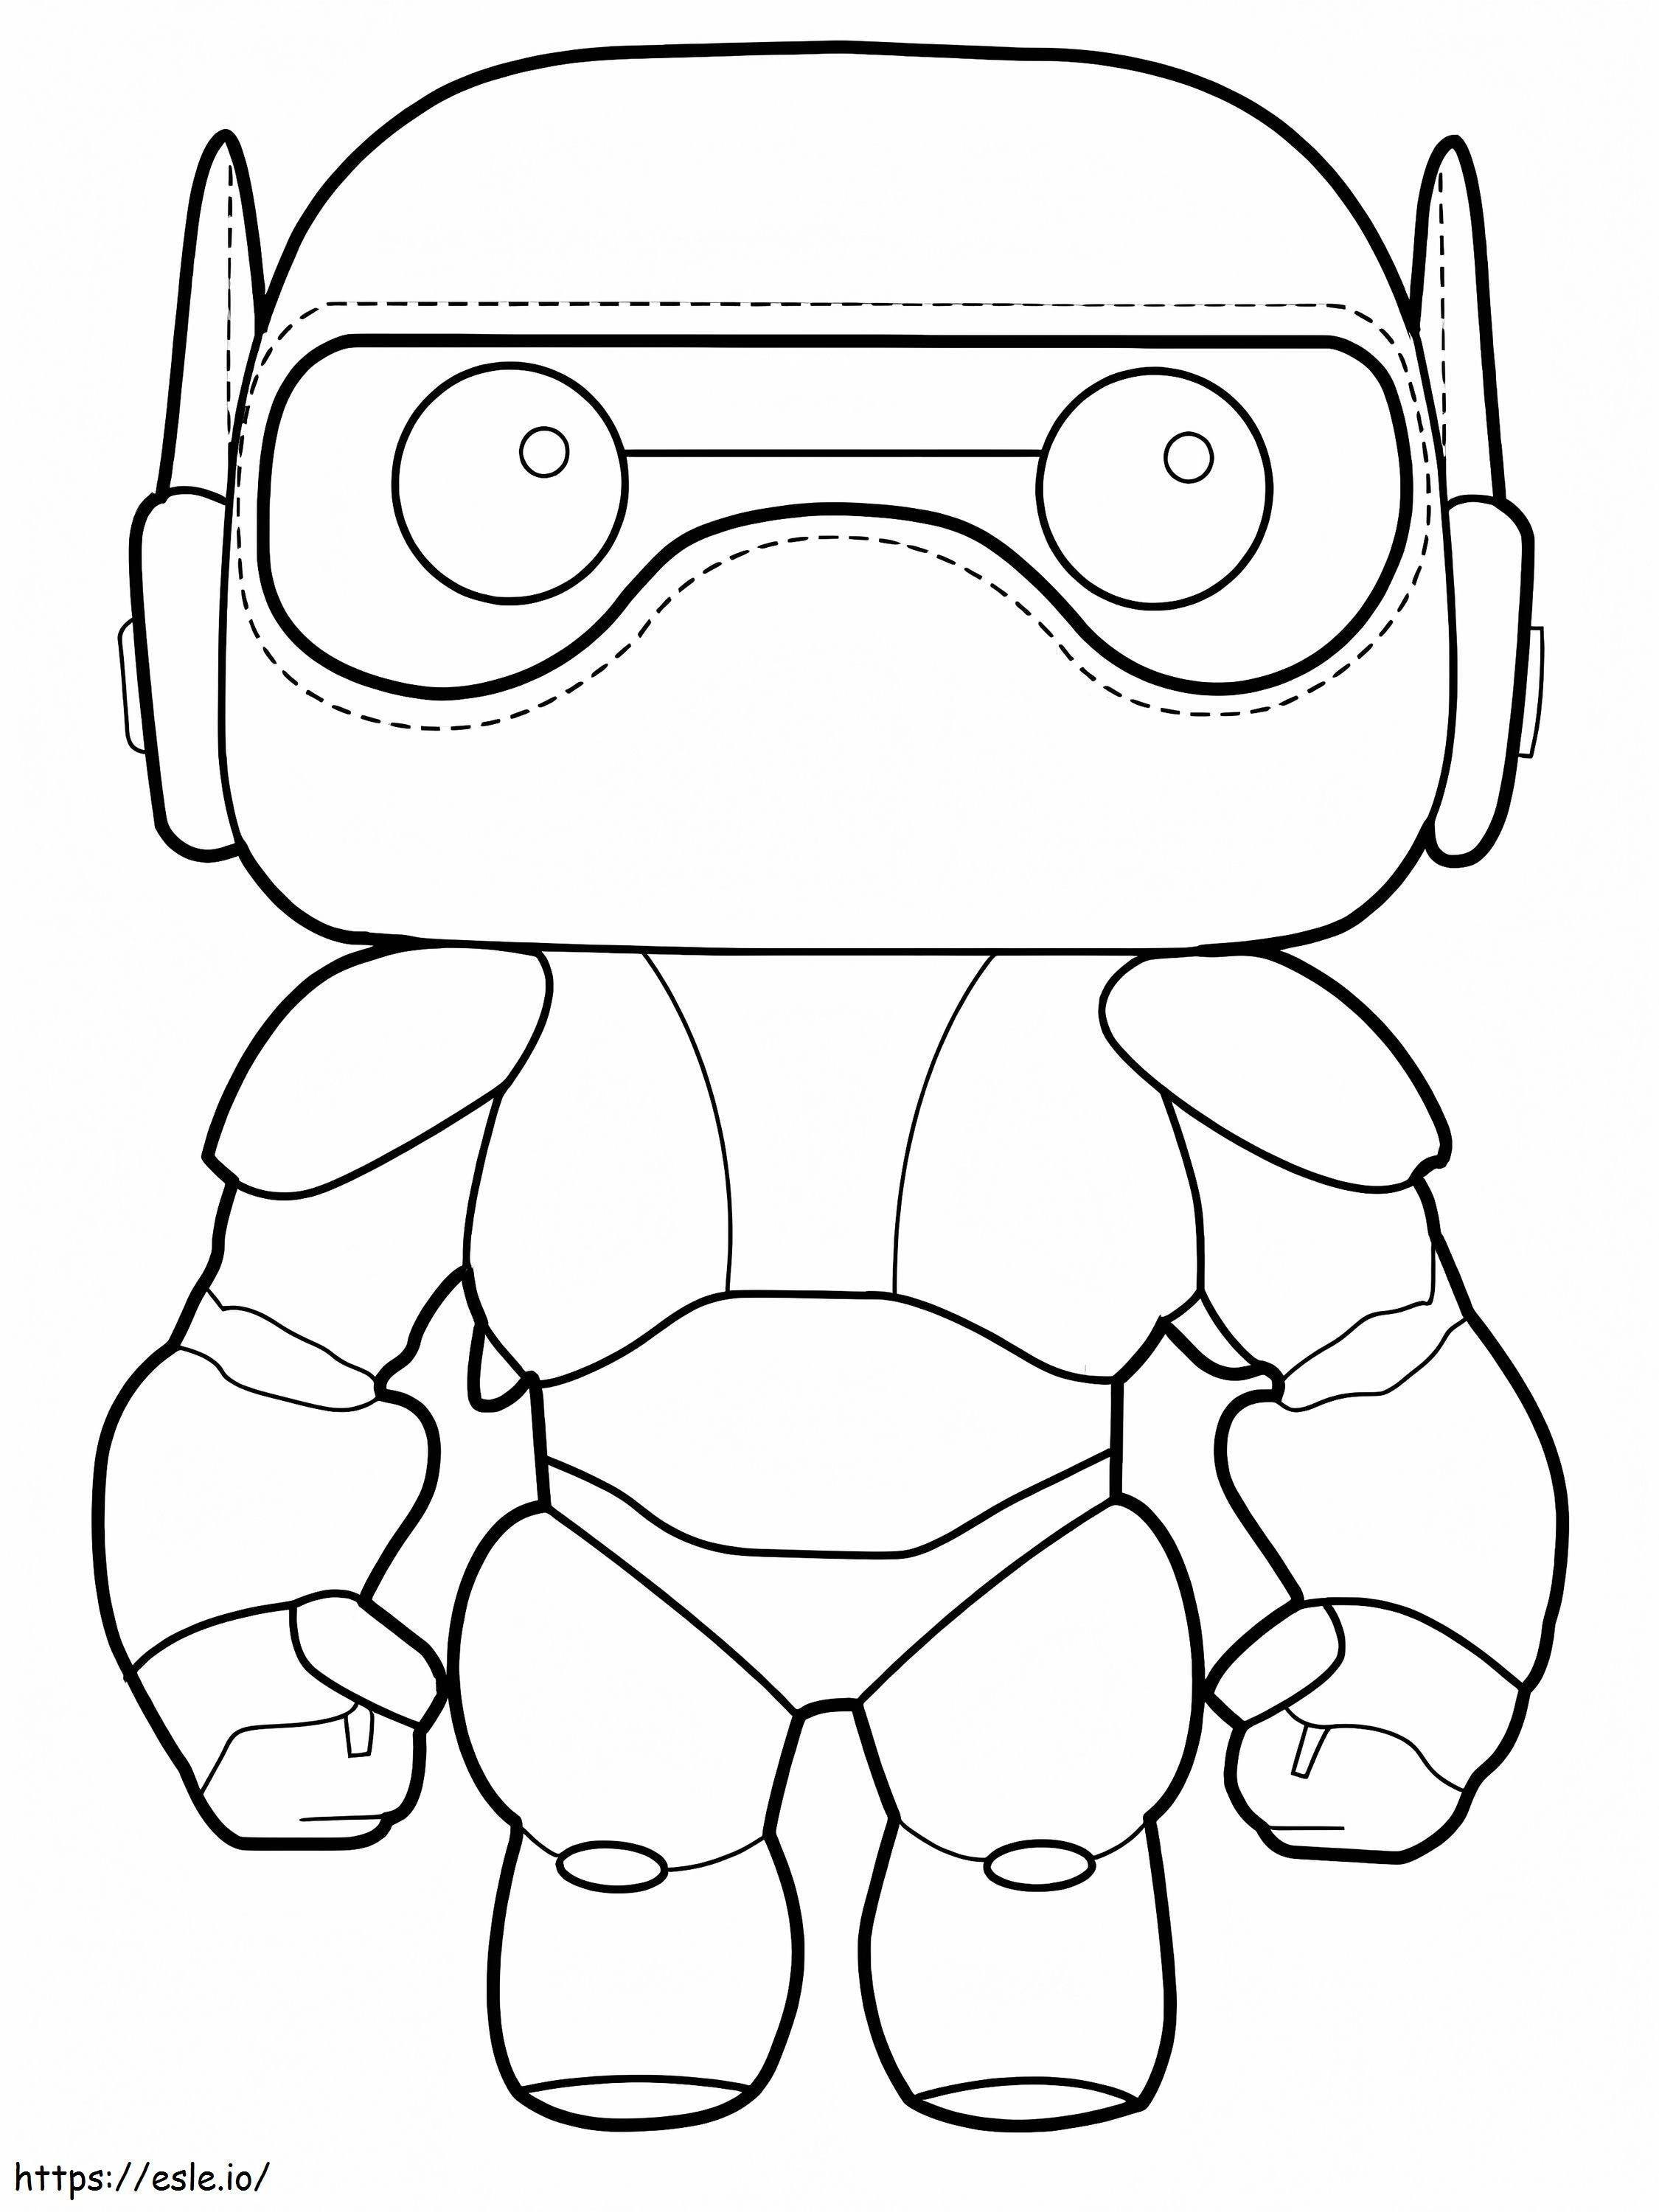 Baymax Armored Chibi coloring page